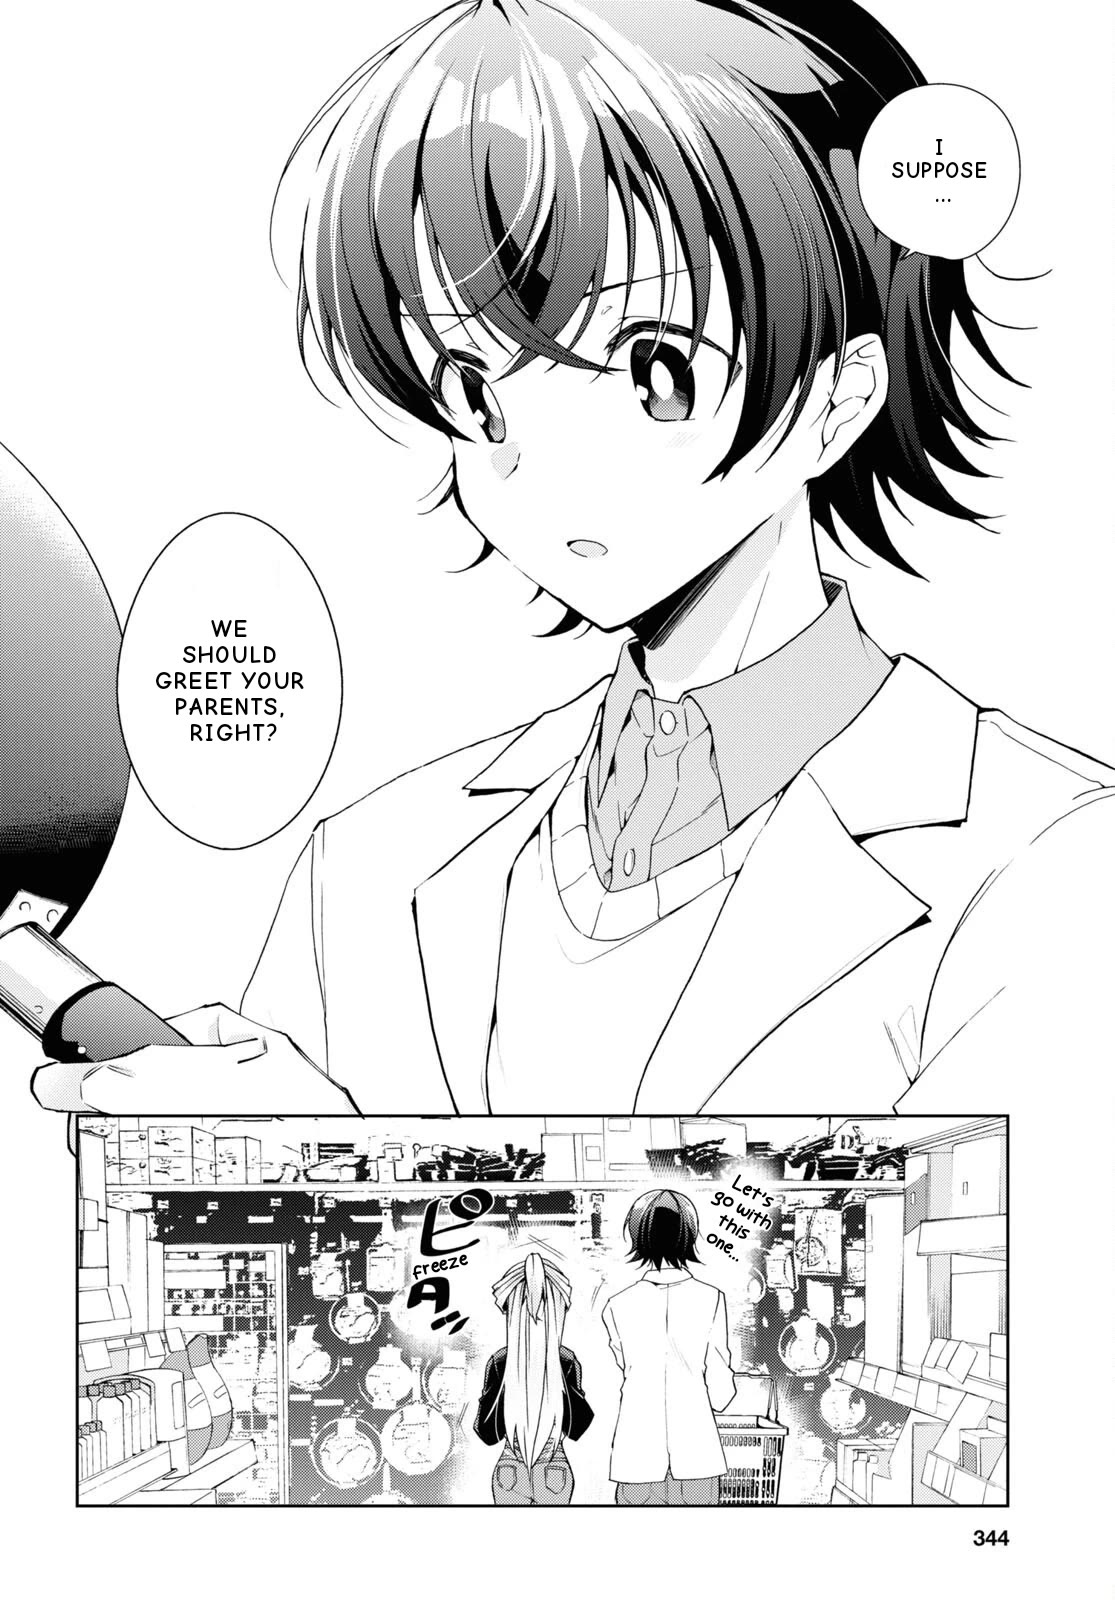 Isshiki-san Wants to Know About Love. - chapter 26 - #3